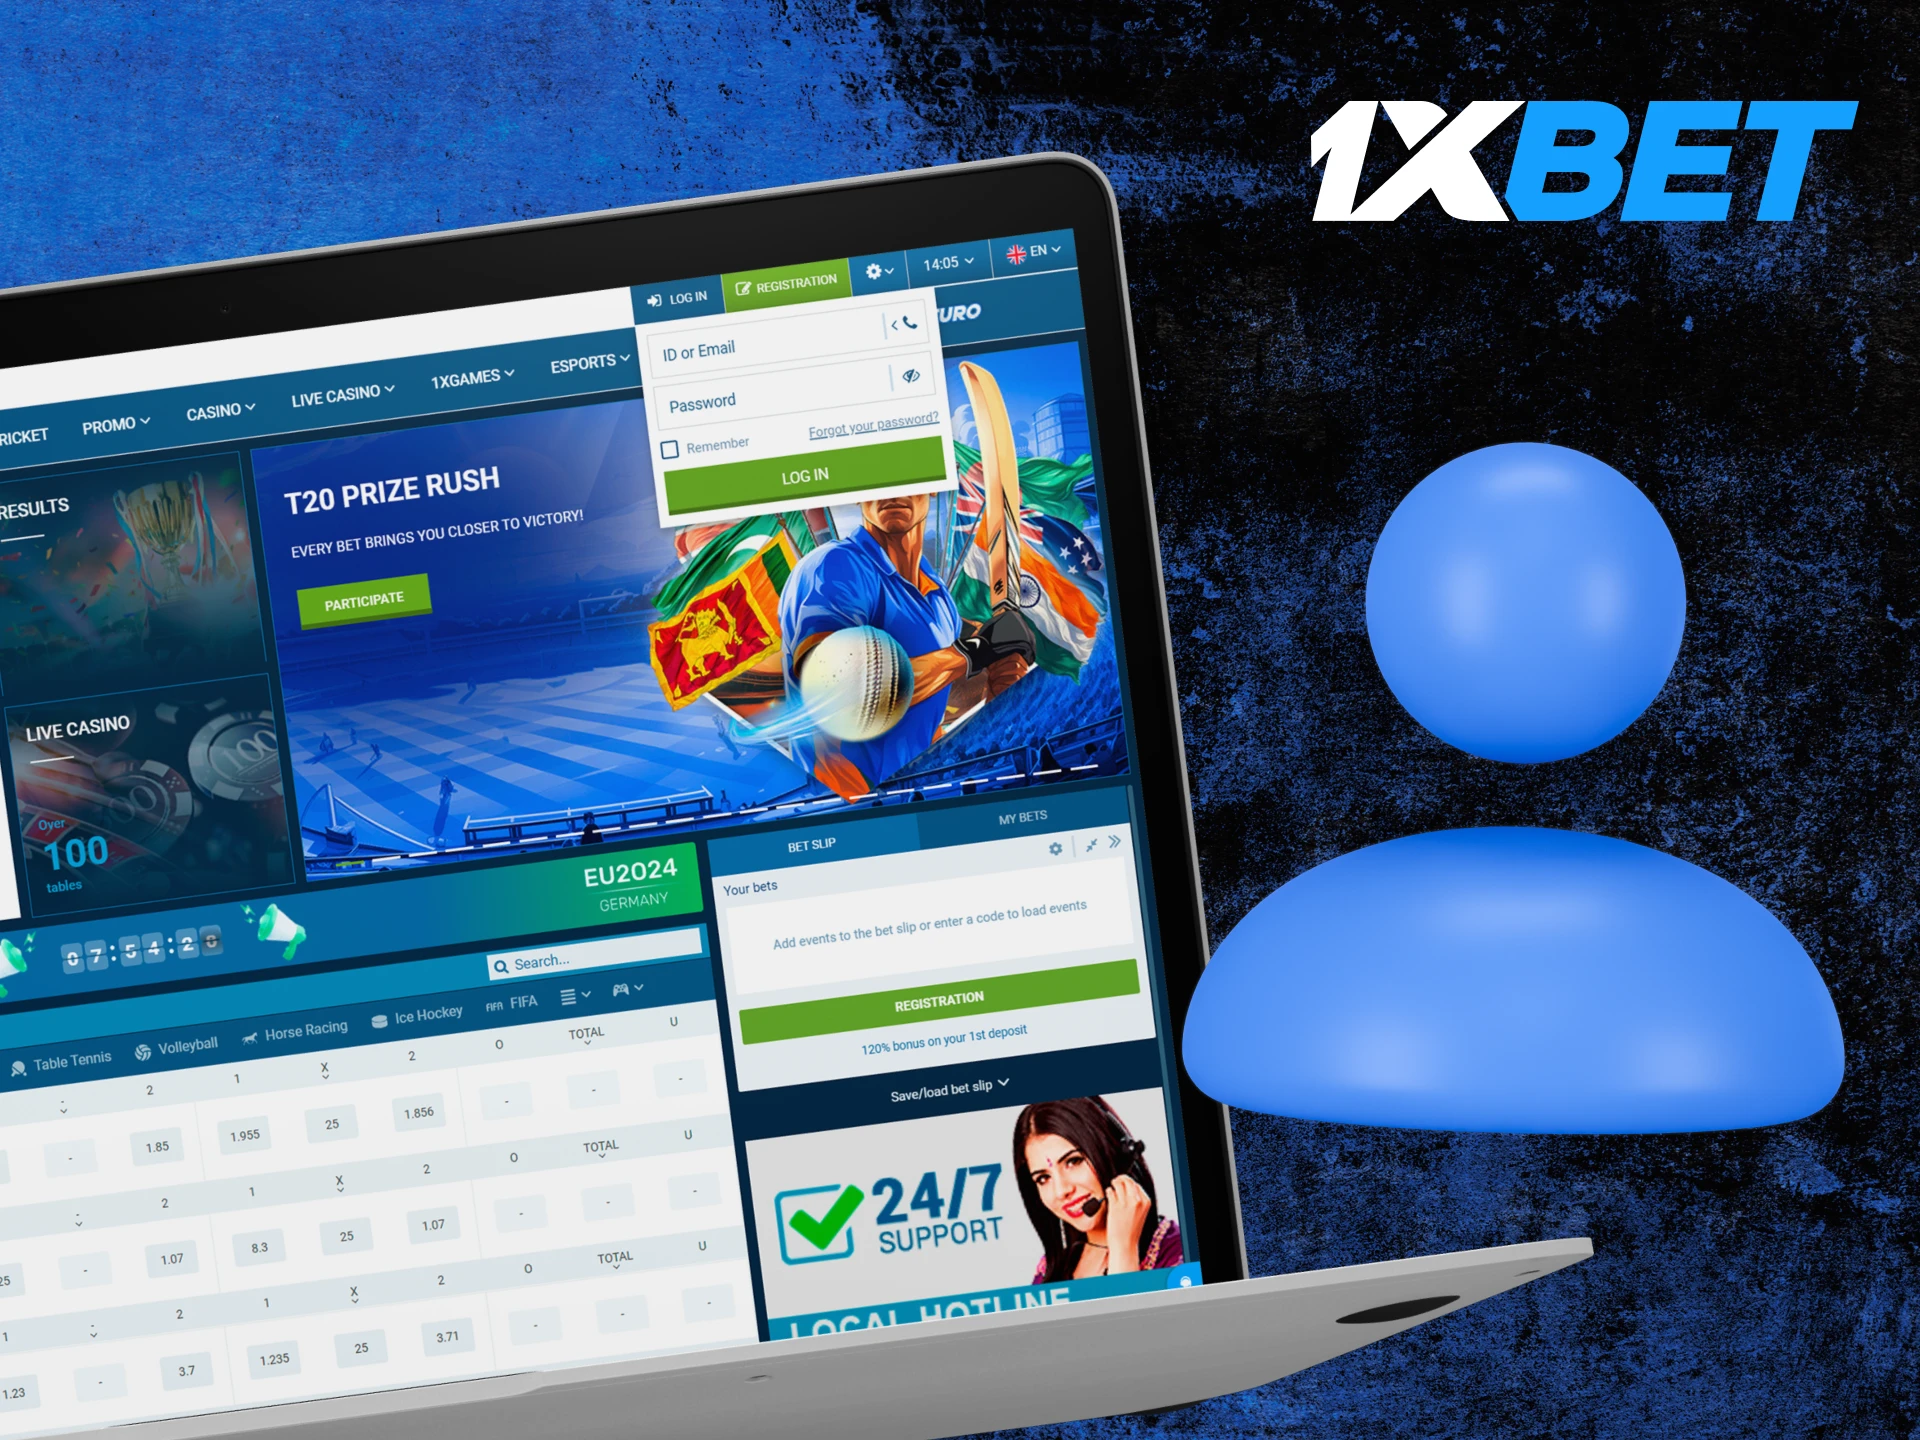 Log in to your existing 1xBet account to bet on football.